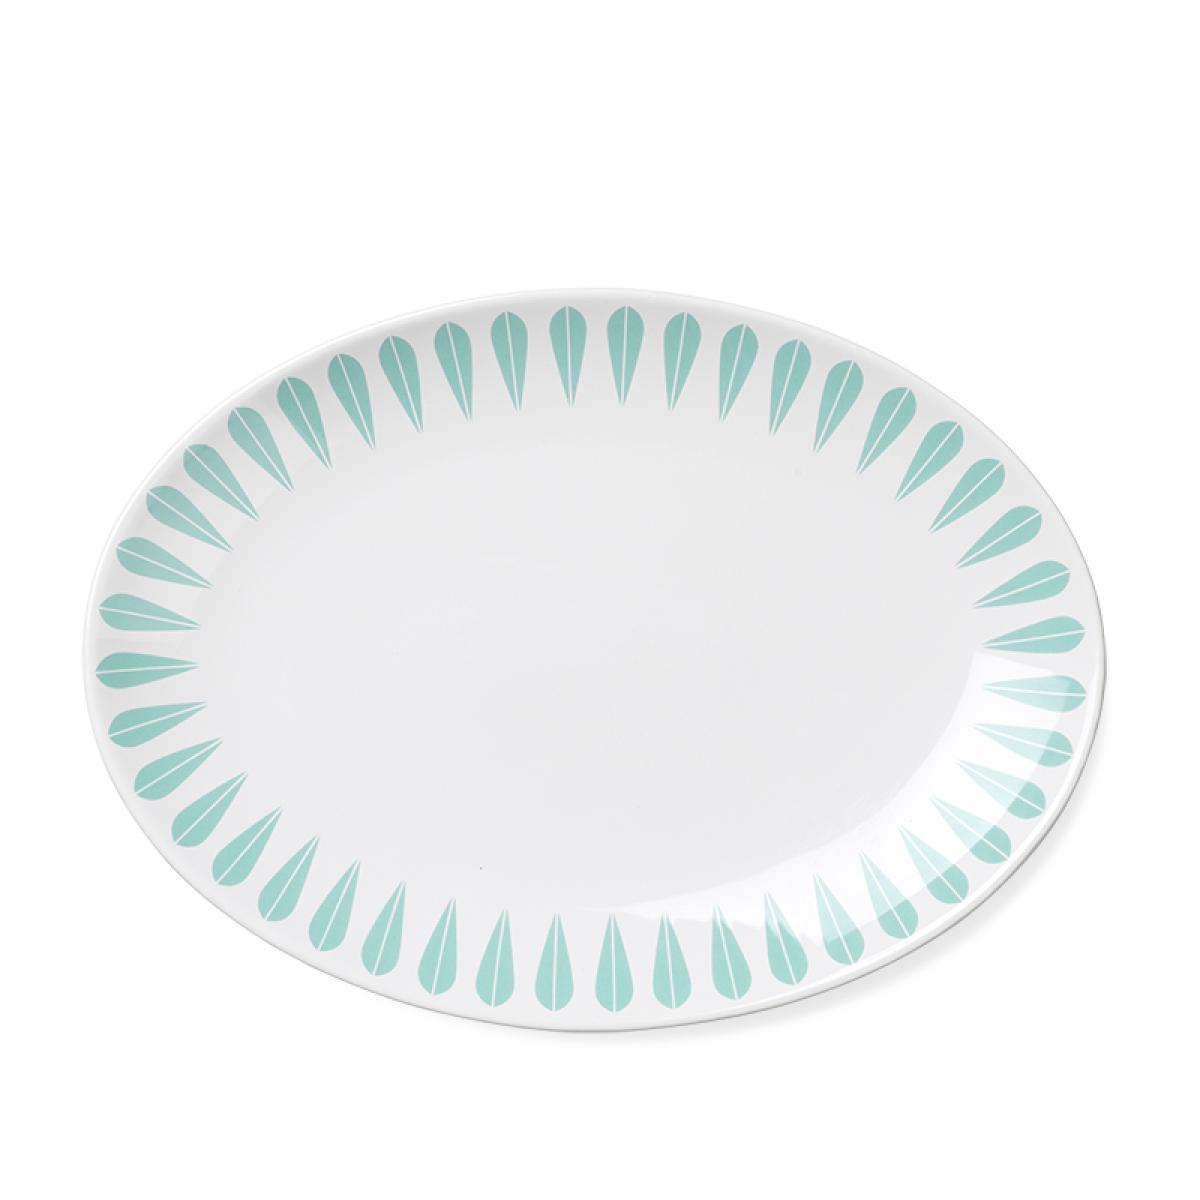 Lucie Kaas Arne Clausen Collection Serving Plate Mint Green, 34 cm